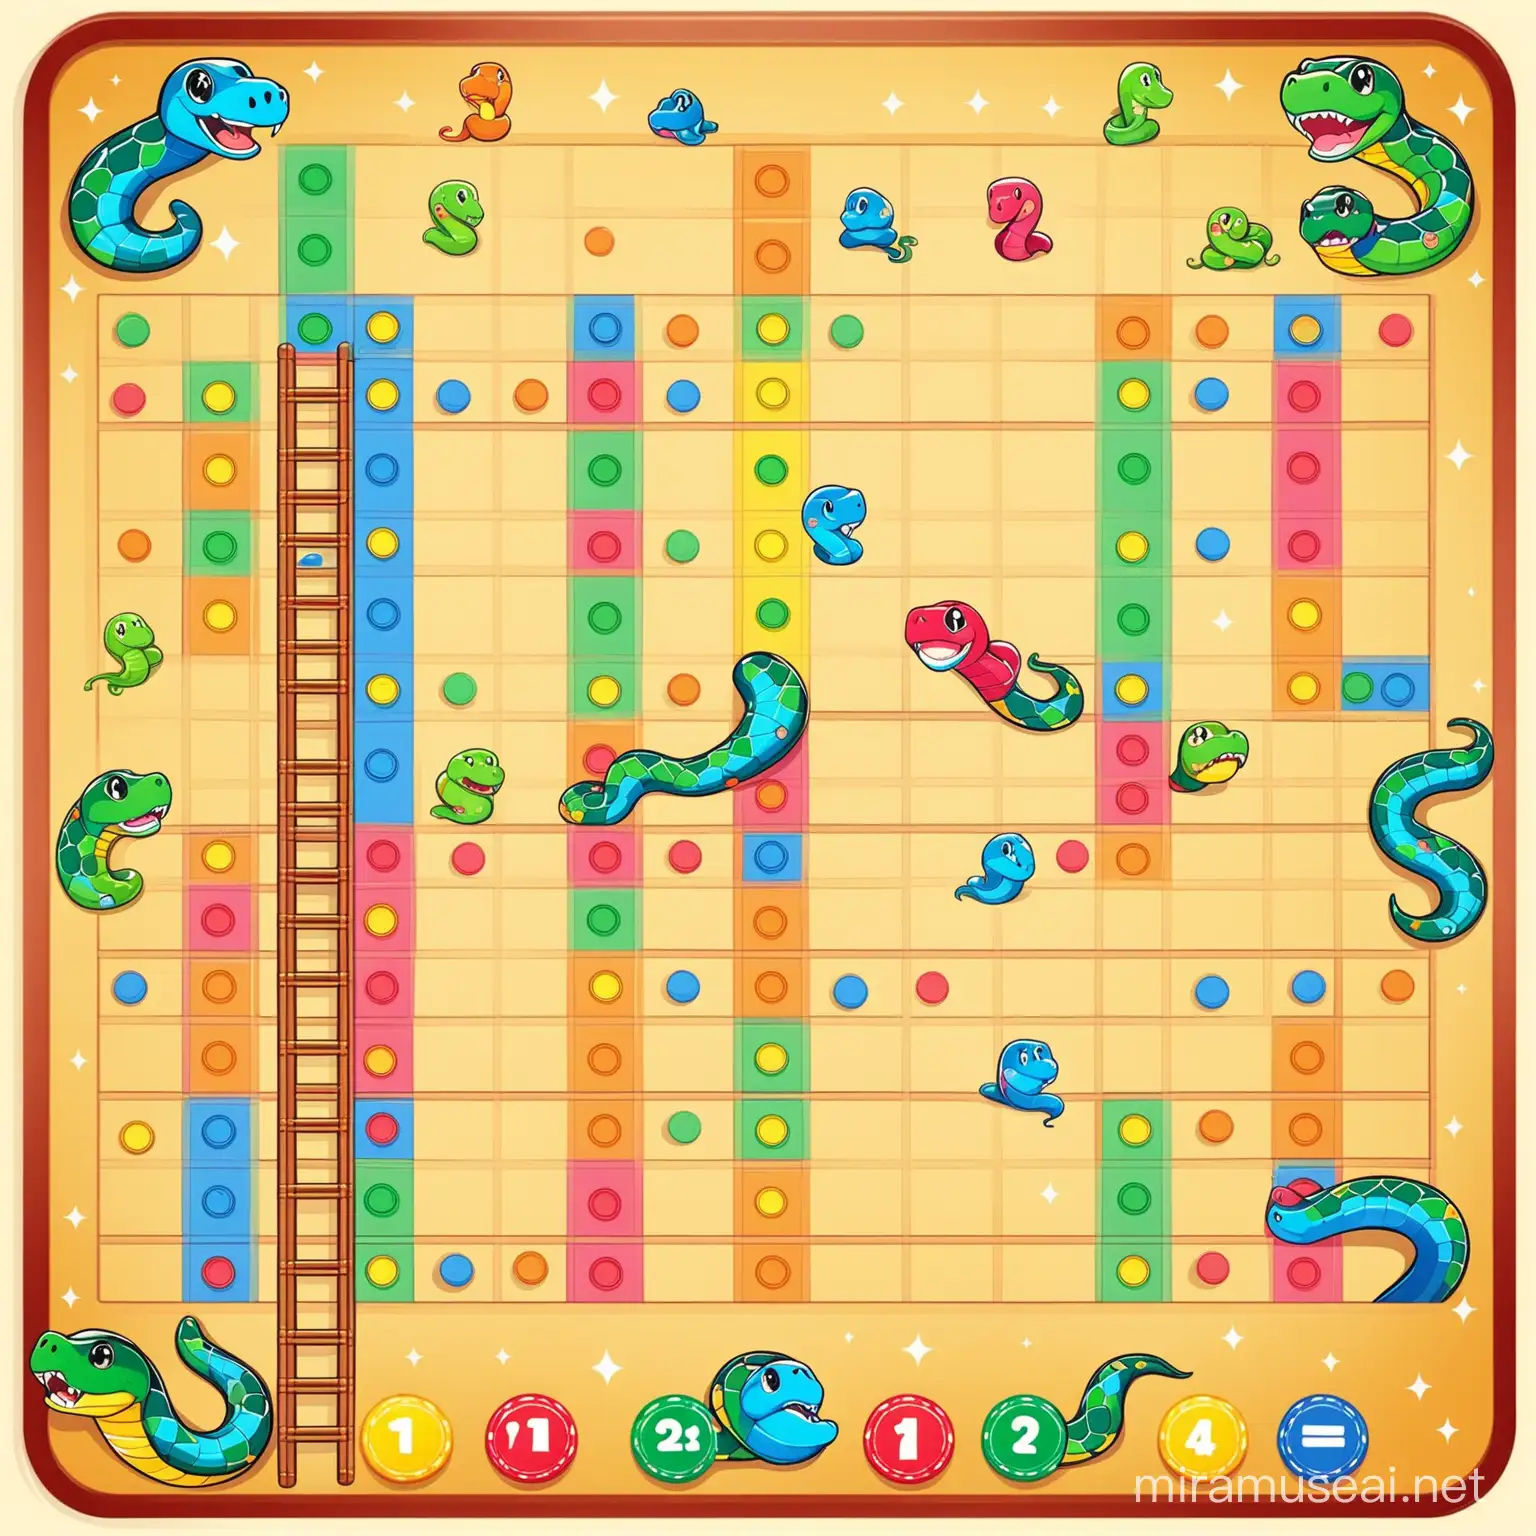 can you generate an image of of snake and ladder board game that is very fun, colorful and attractive to children. the image must not mentiuon that  it is a game of snake and ladder 